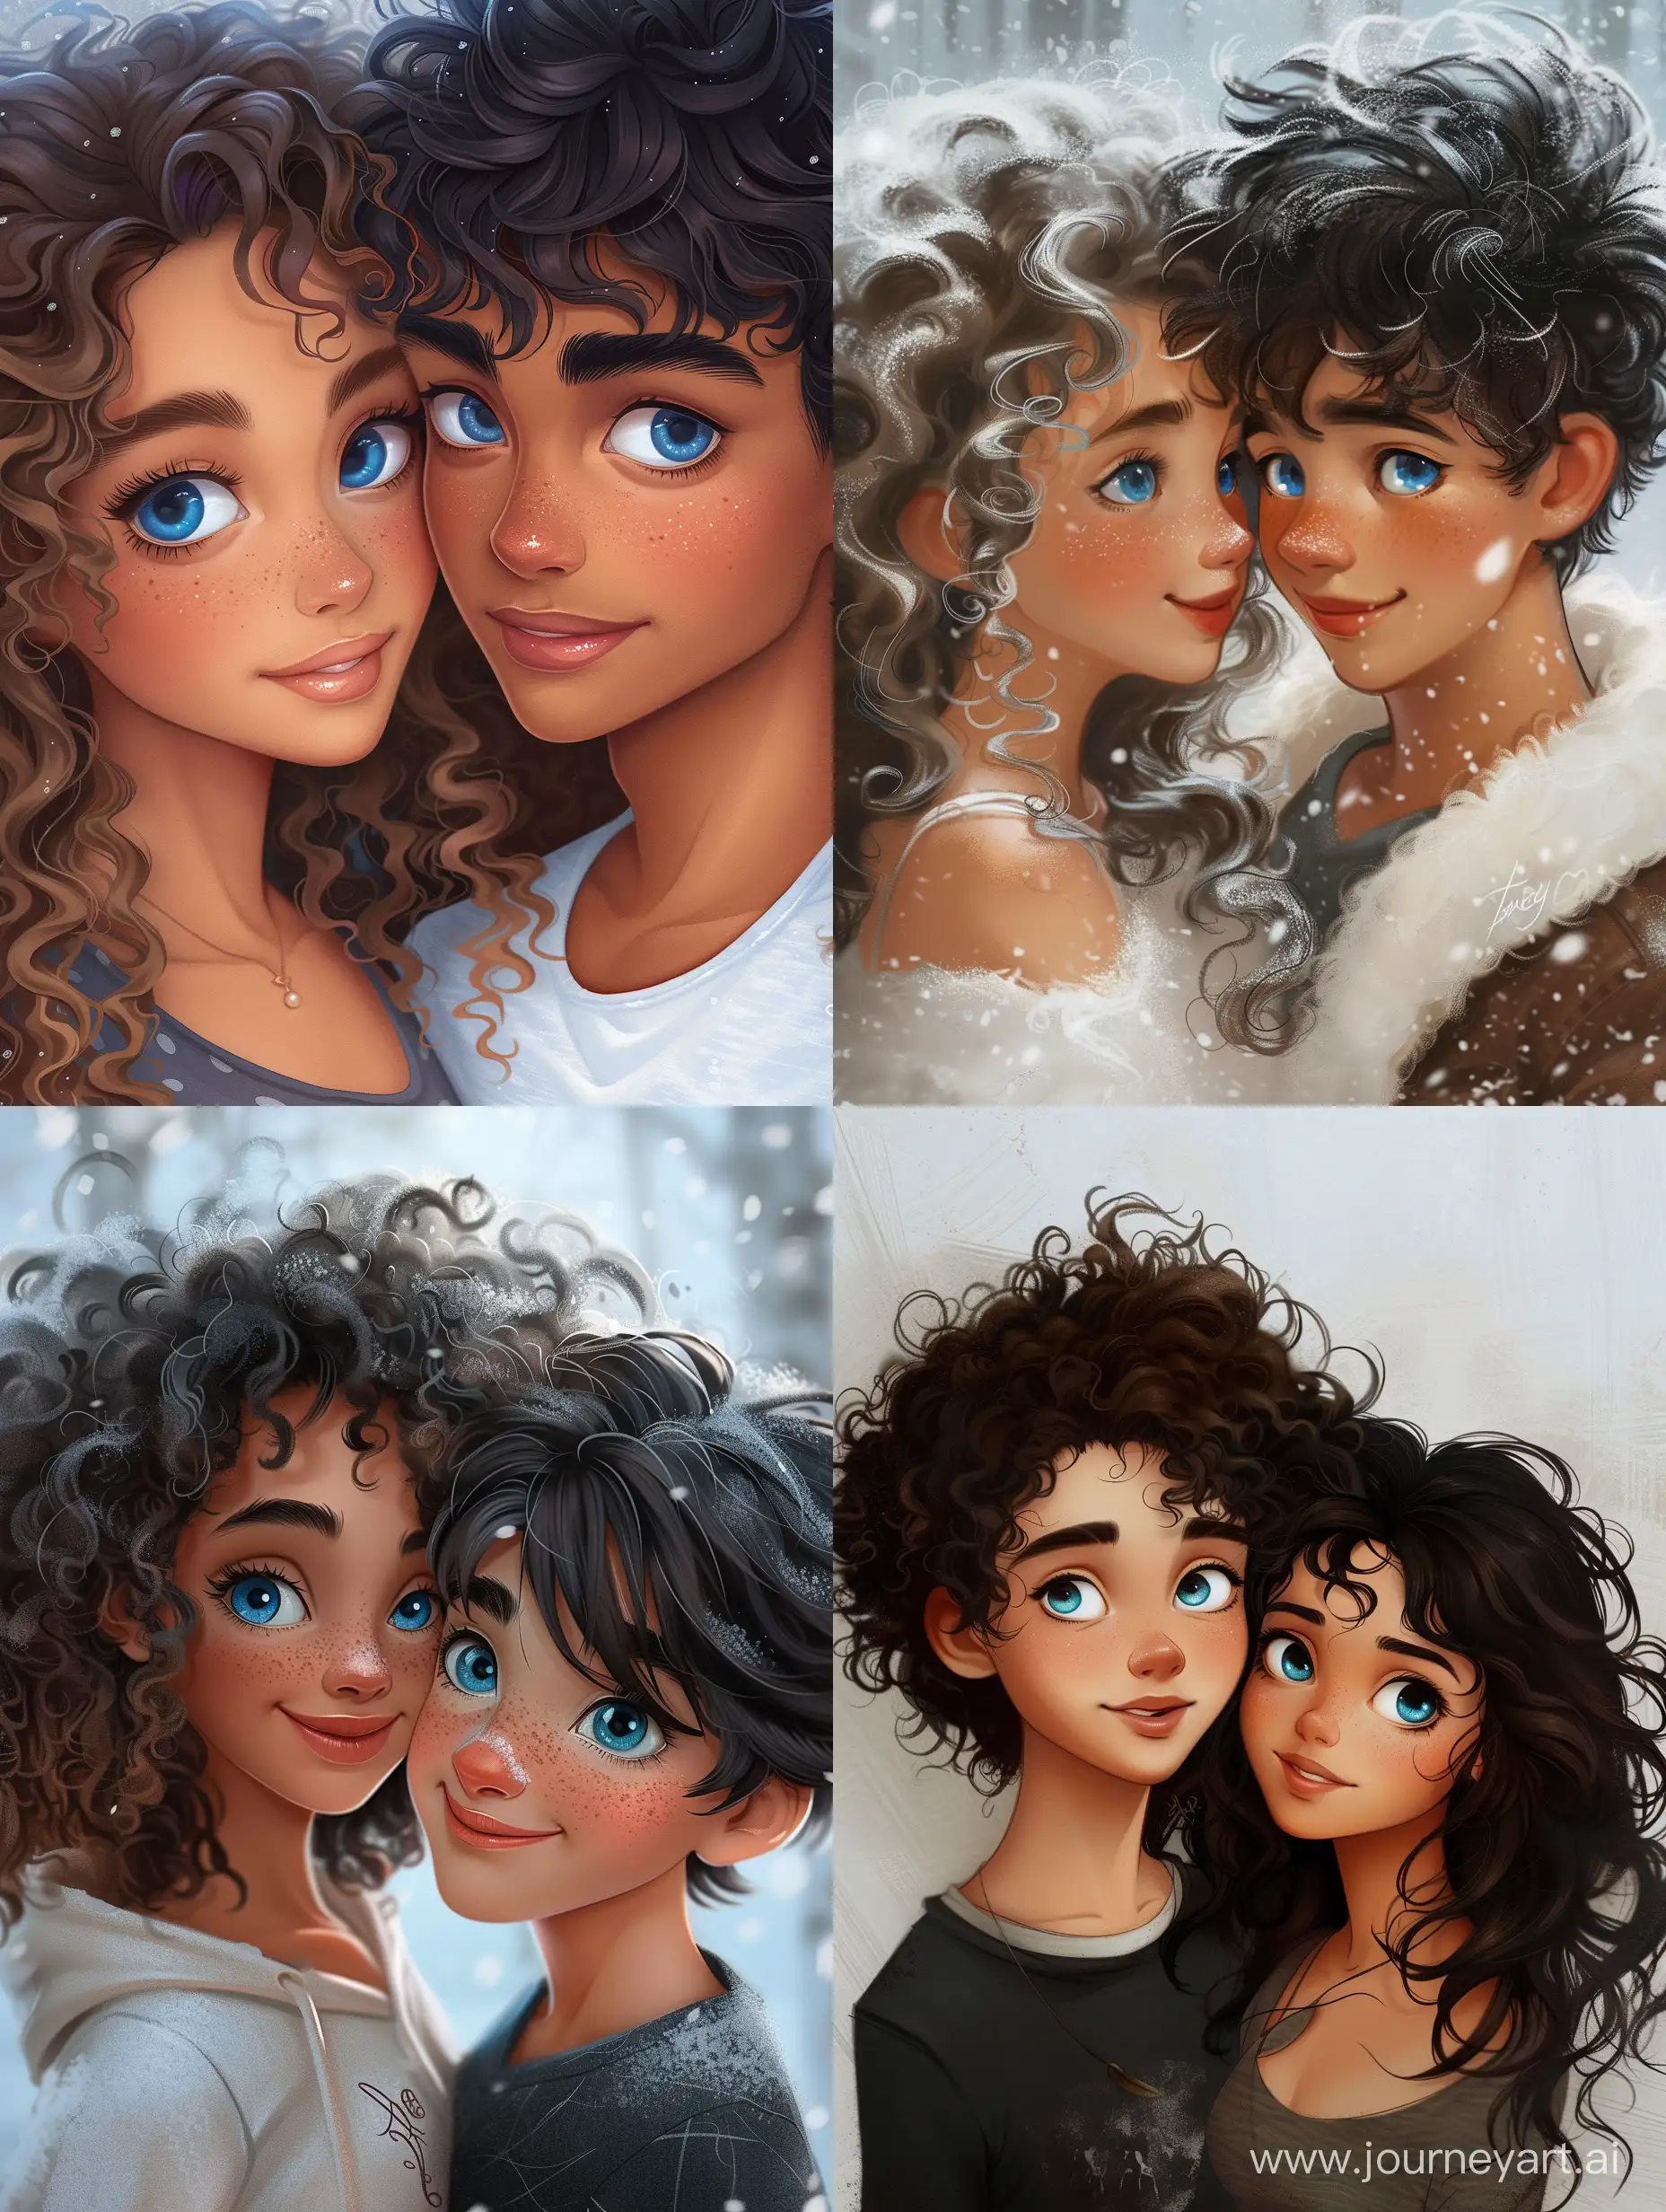 Adorable-Teenage-Love-Cartoon-Art-of-a-Beautiful-CurlyHaired-Girl-and-Cute-DarkHaired-Boy